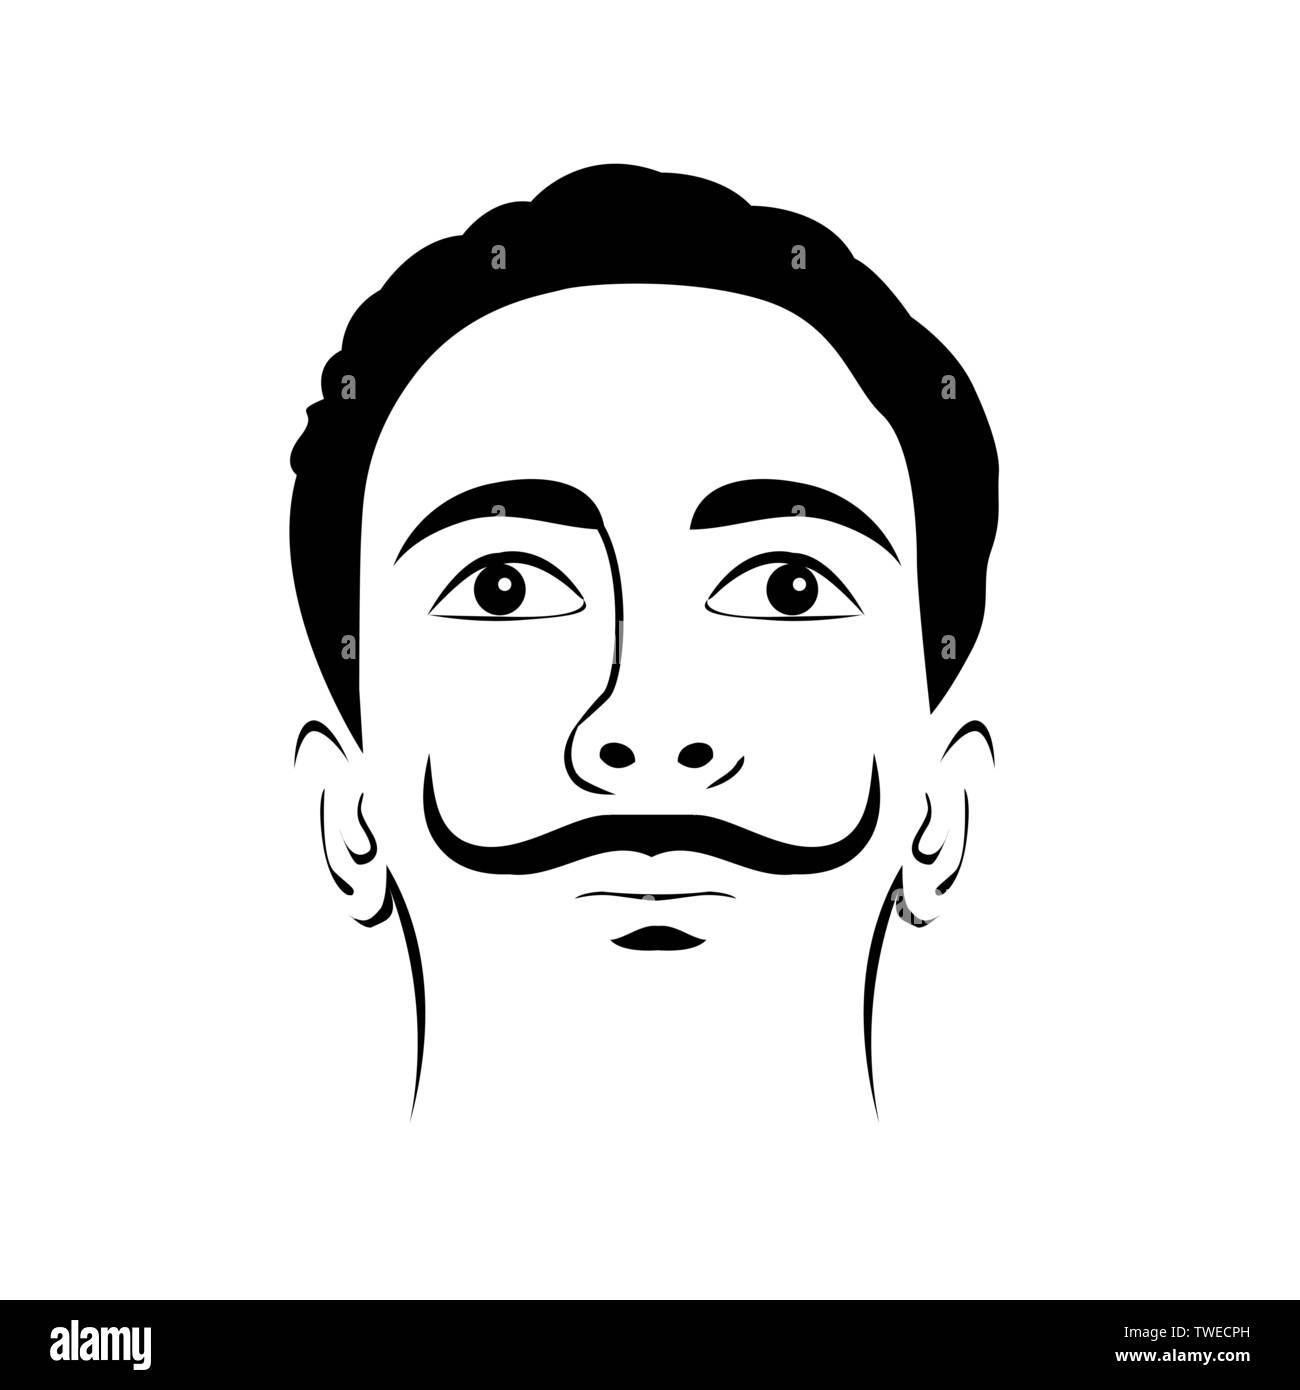 Illustration of Salvador dali in abstract style Stock Vector